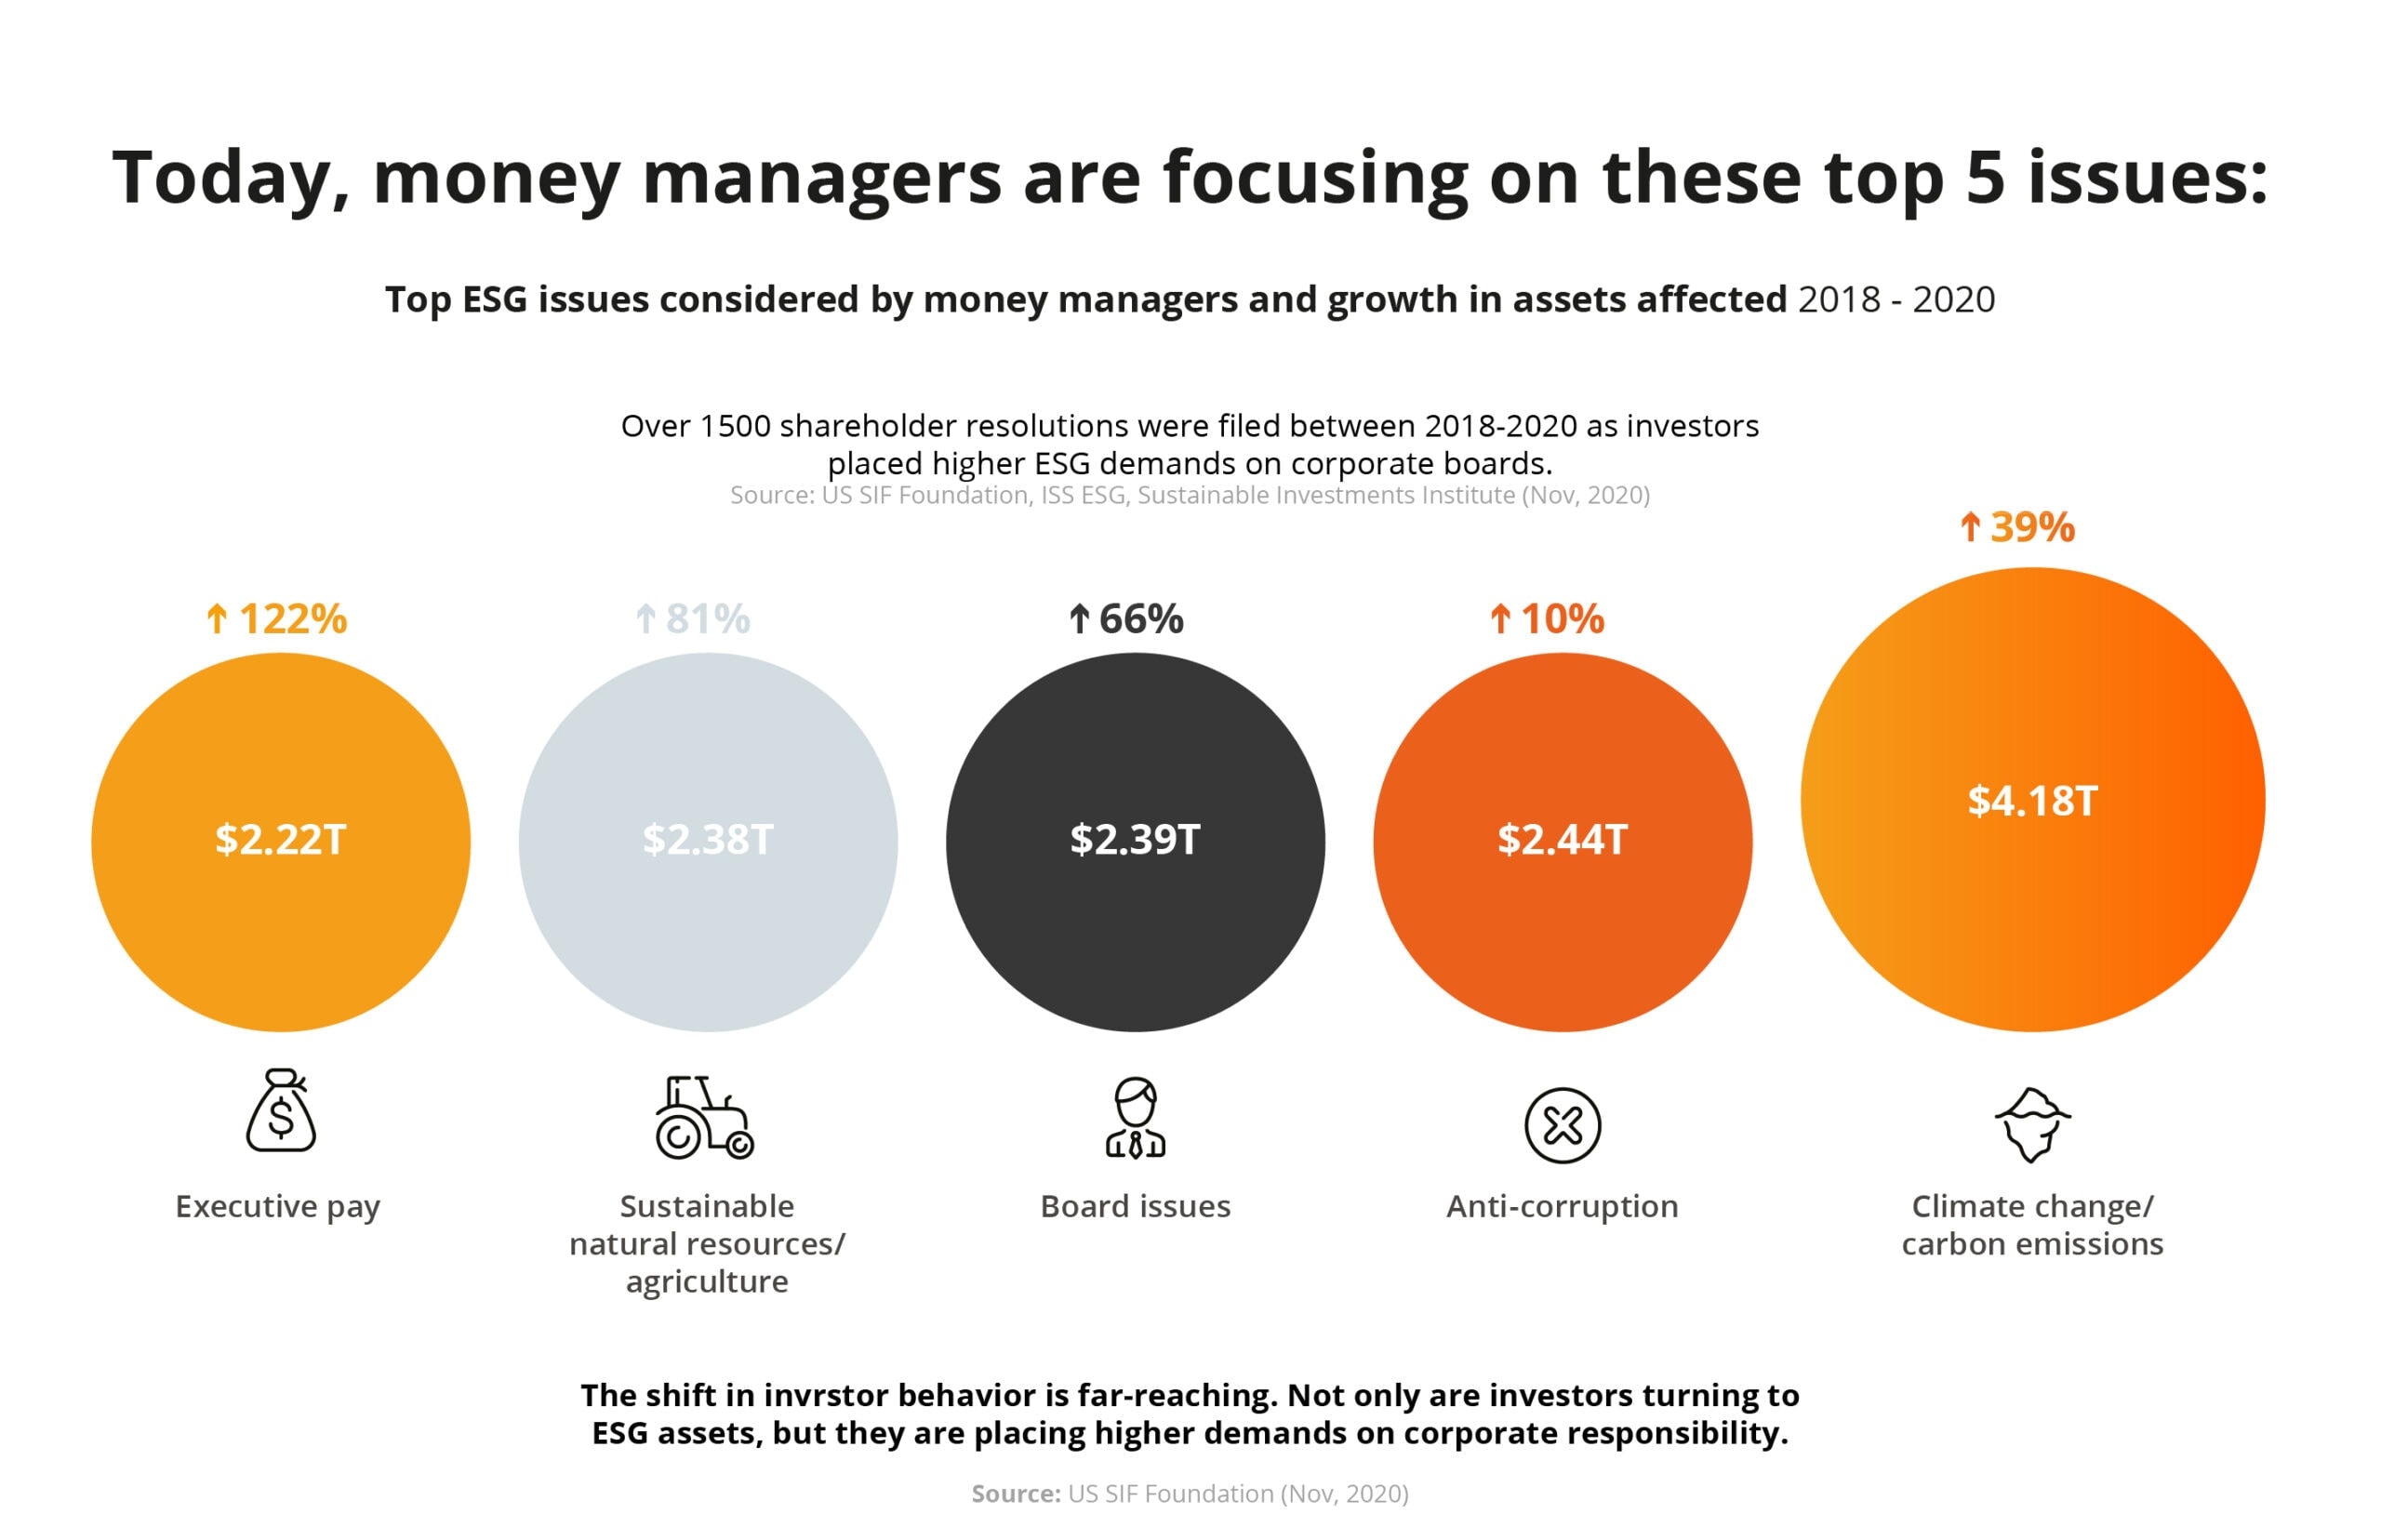 Top ESG issues considered by money managers and growth in assets affected 2018-2020